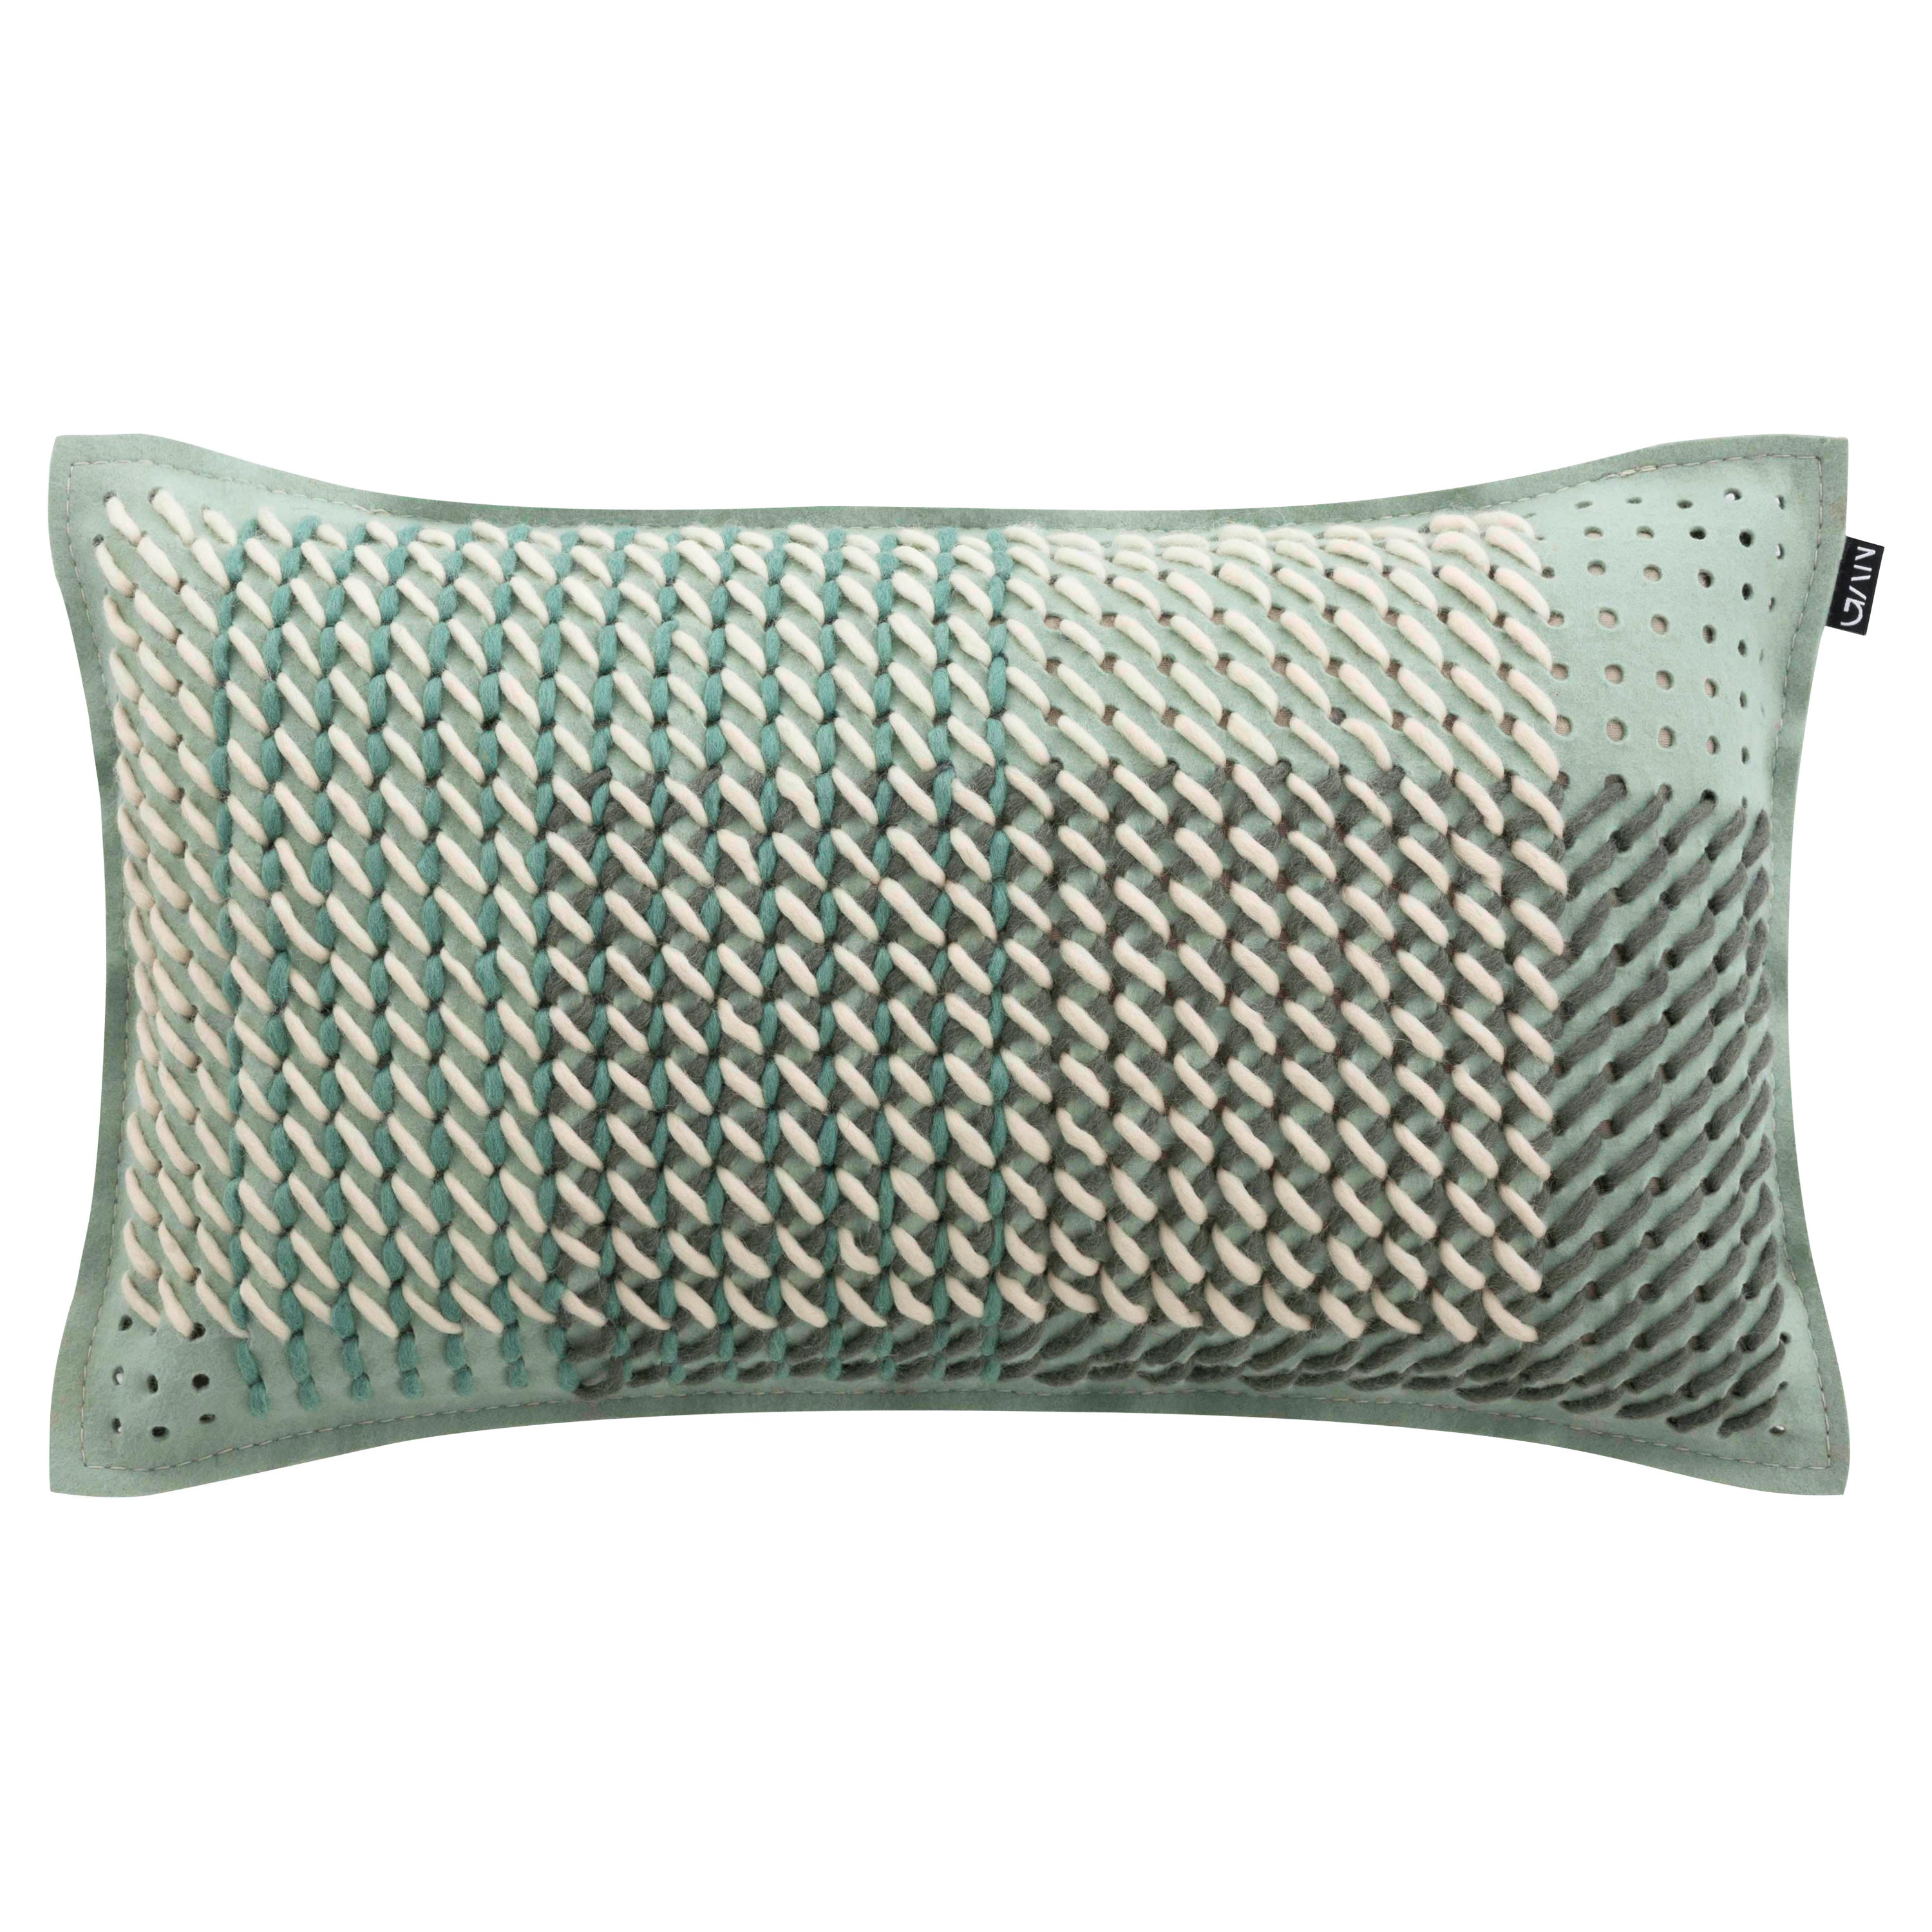 GAN Spaces Canevas Geo Large Pillow in Green by Charlotte Lancelot For Sale